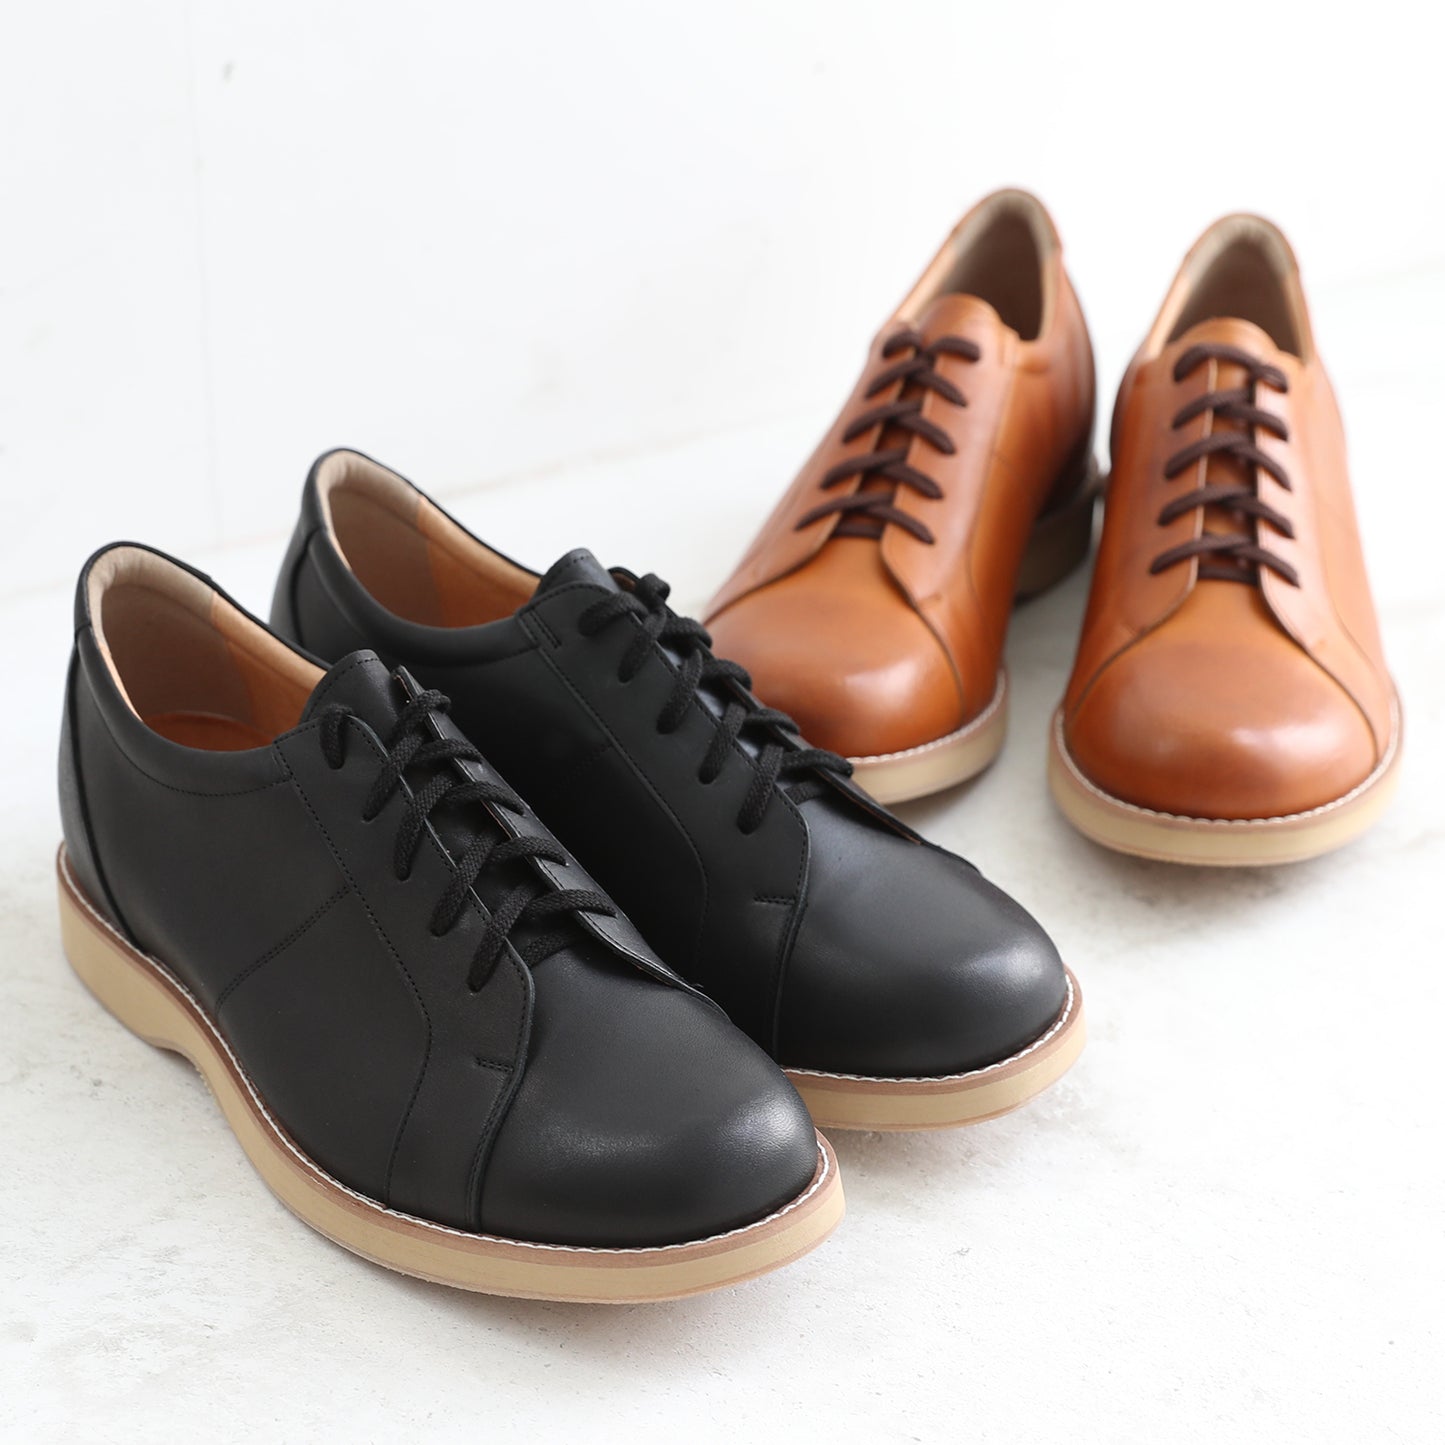 Men's Elevator Shoes Height Increasing 2.2" Taller Casual Shoes Genuine Leather Fashion Sneaker No. 516